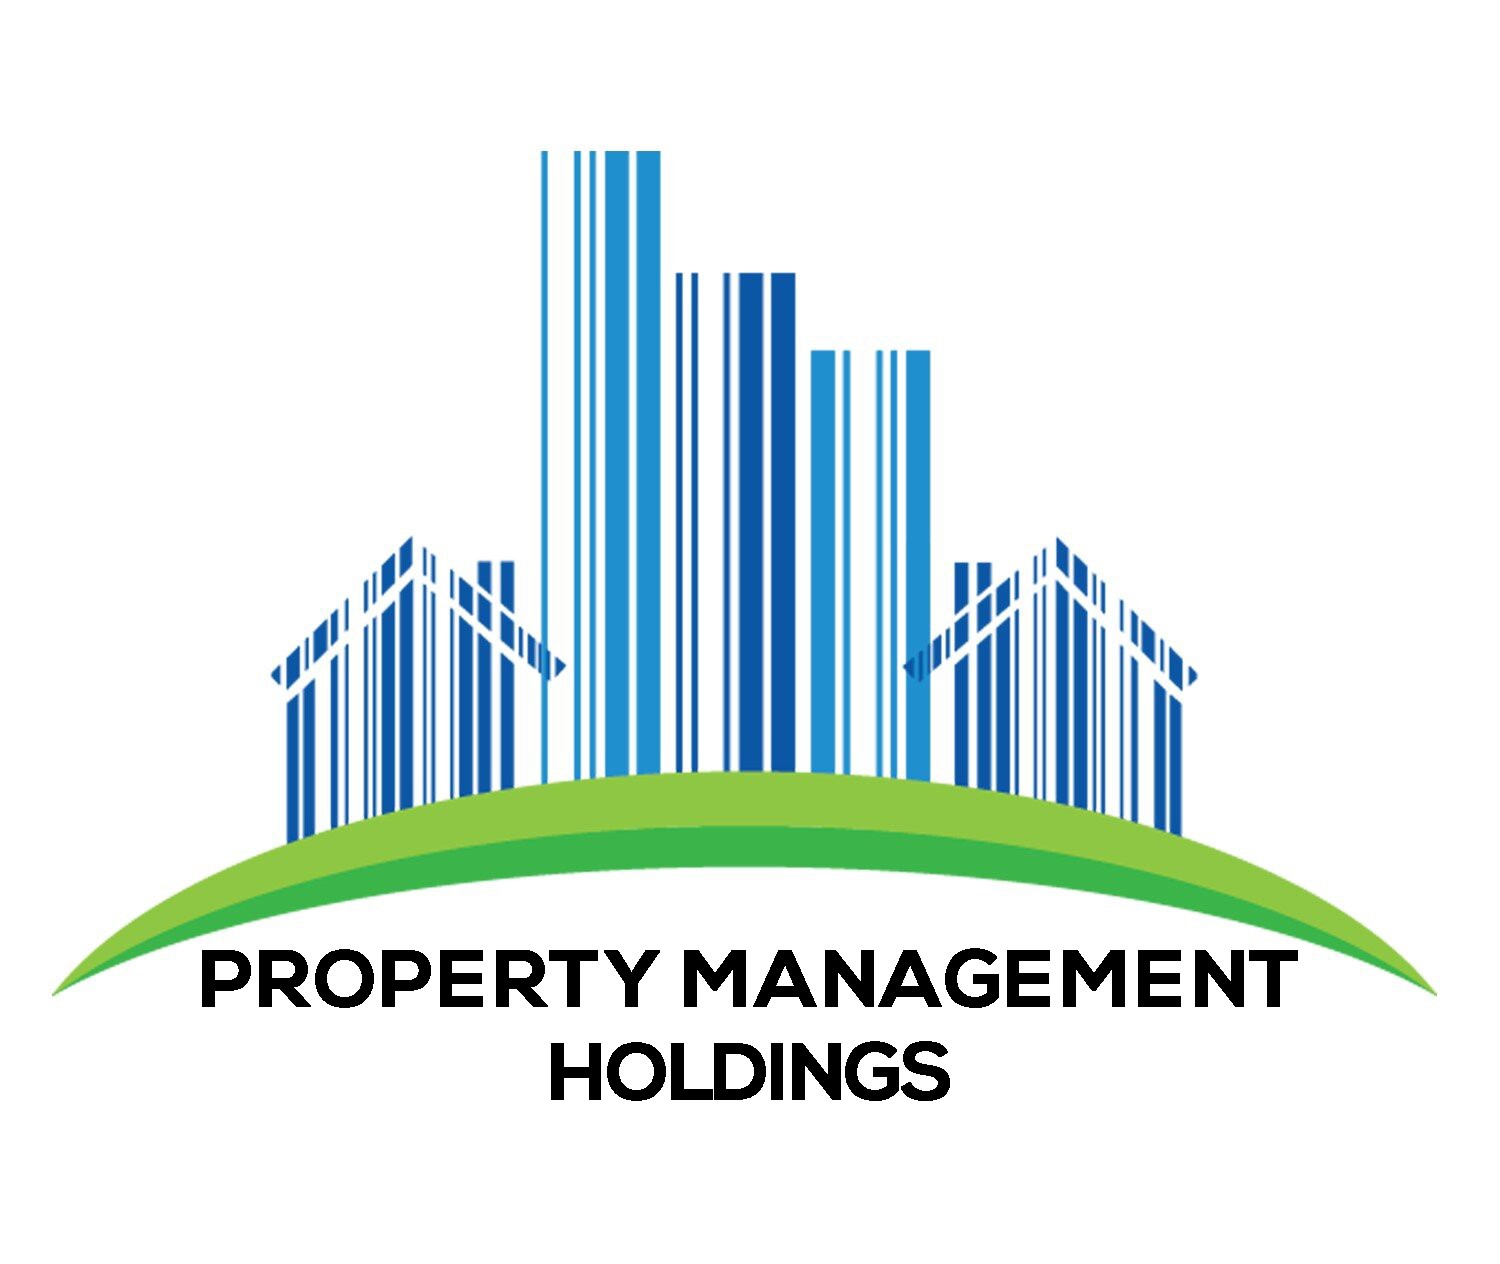 Property Management Holdings